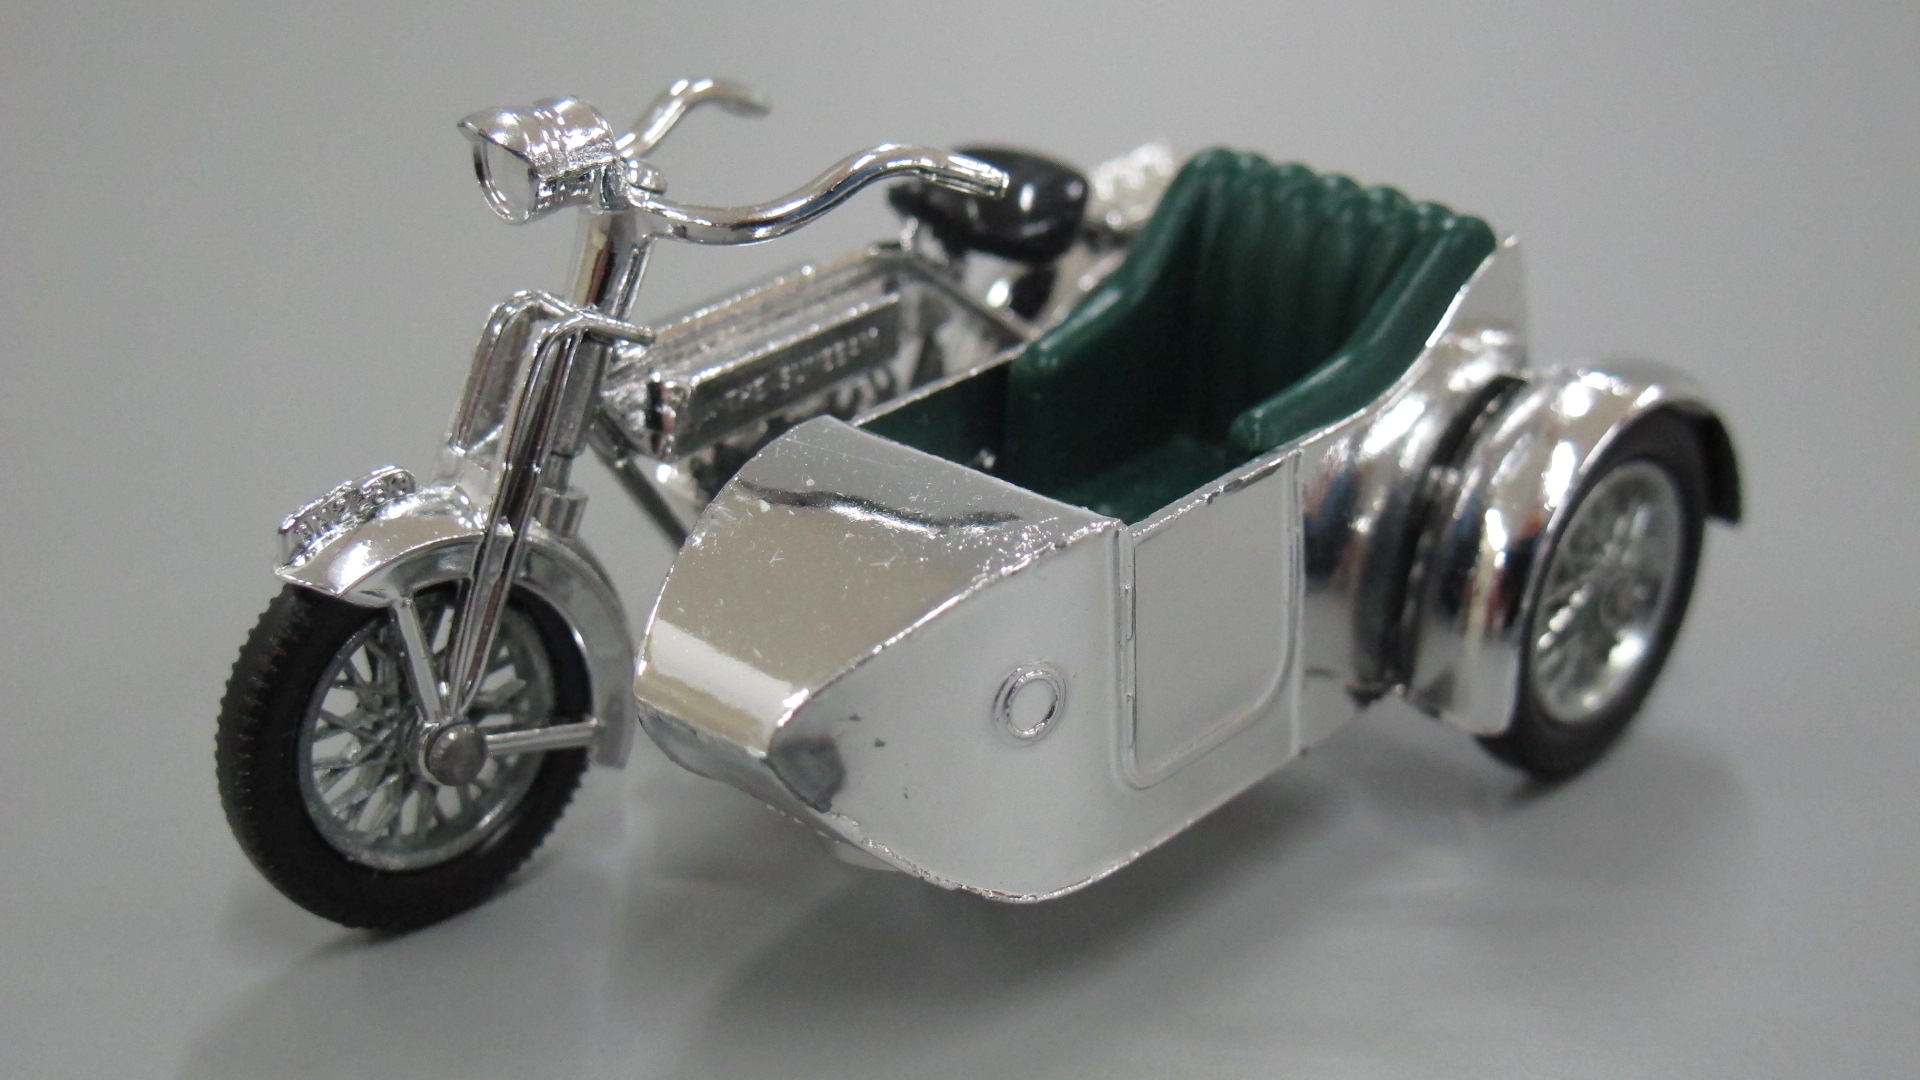 Matchbox 1914 Sunbeam toy motorcycle and sidecar